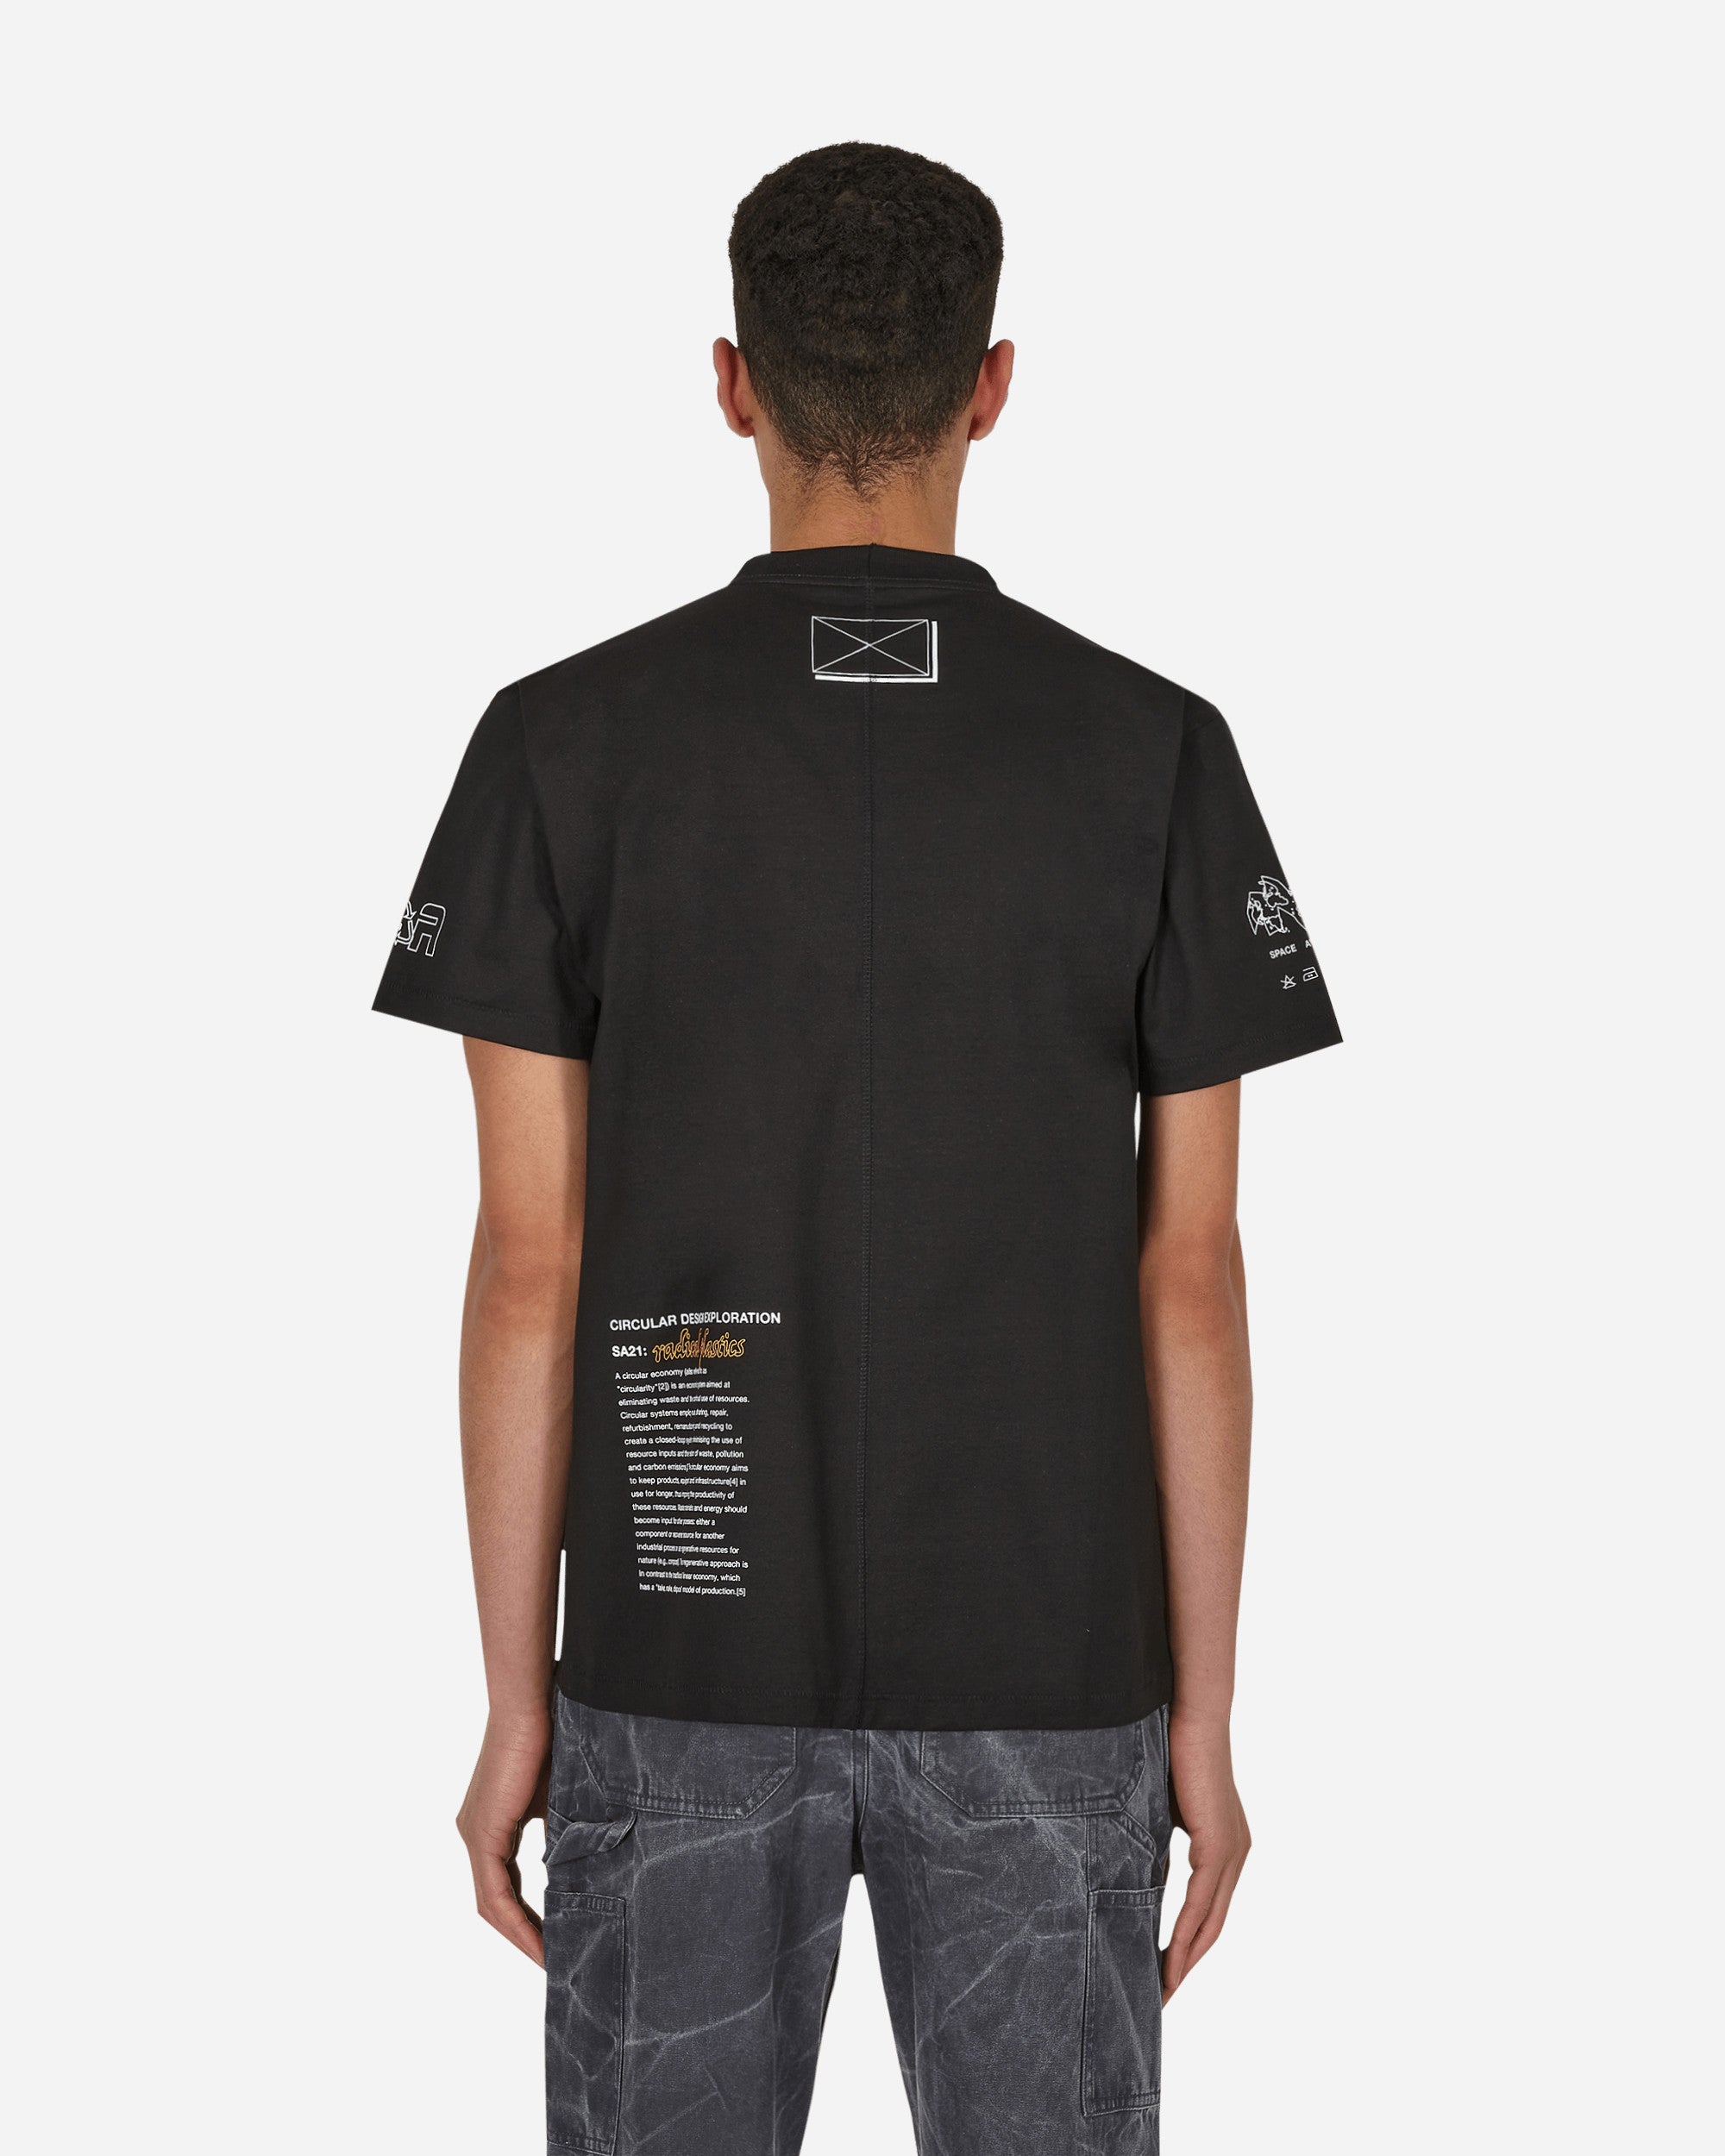 Space Available Space Available Black T-Shirts Shortsleeve SA-SAT001-BLK BLACK